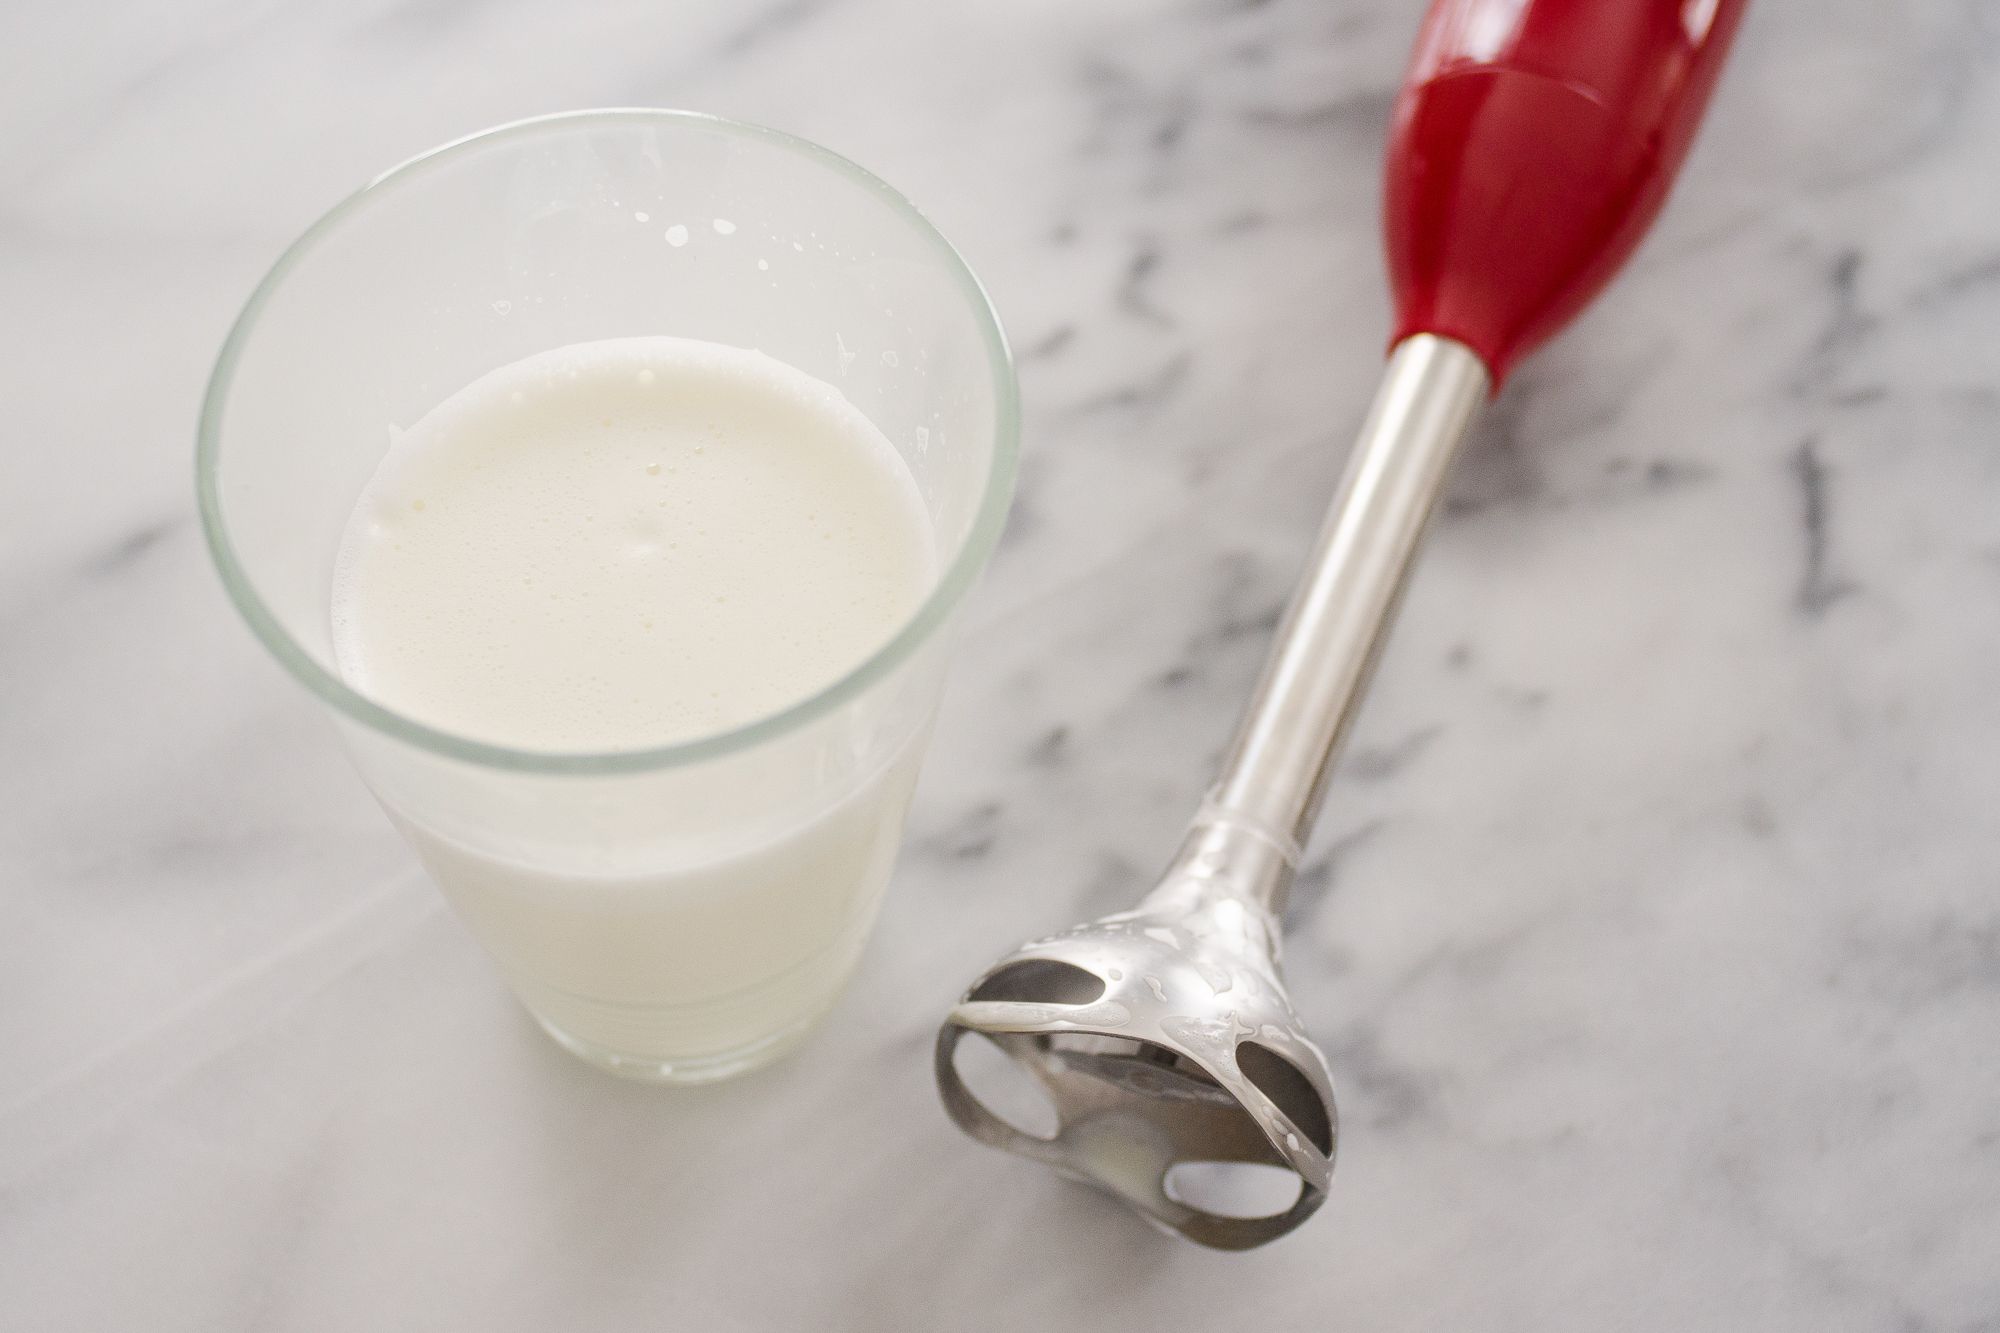 How To Froth Without A Milk Frother